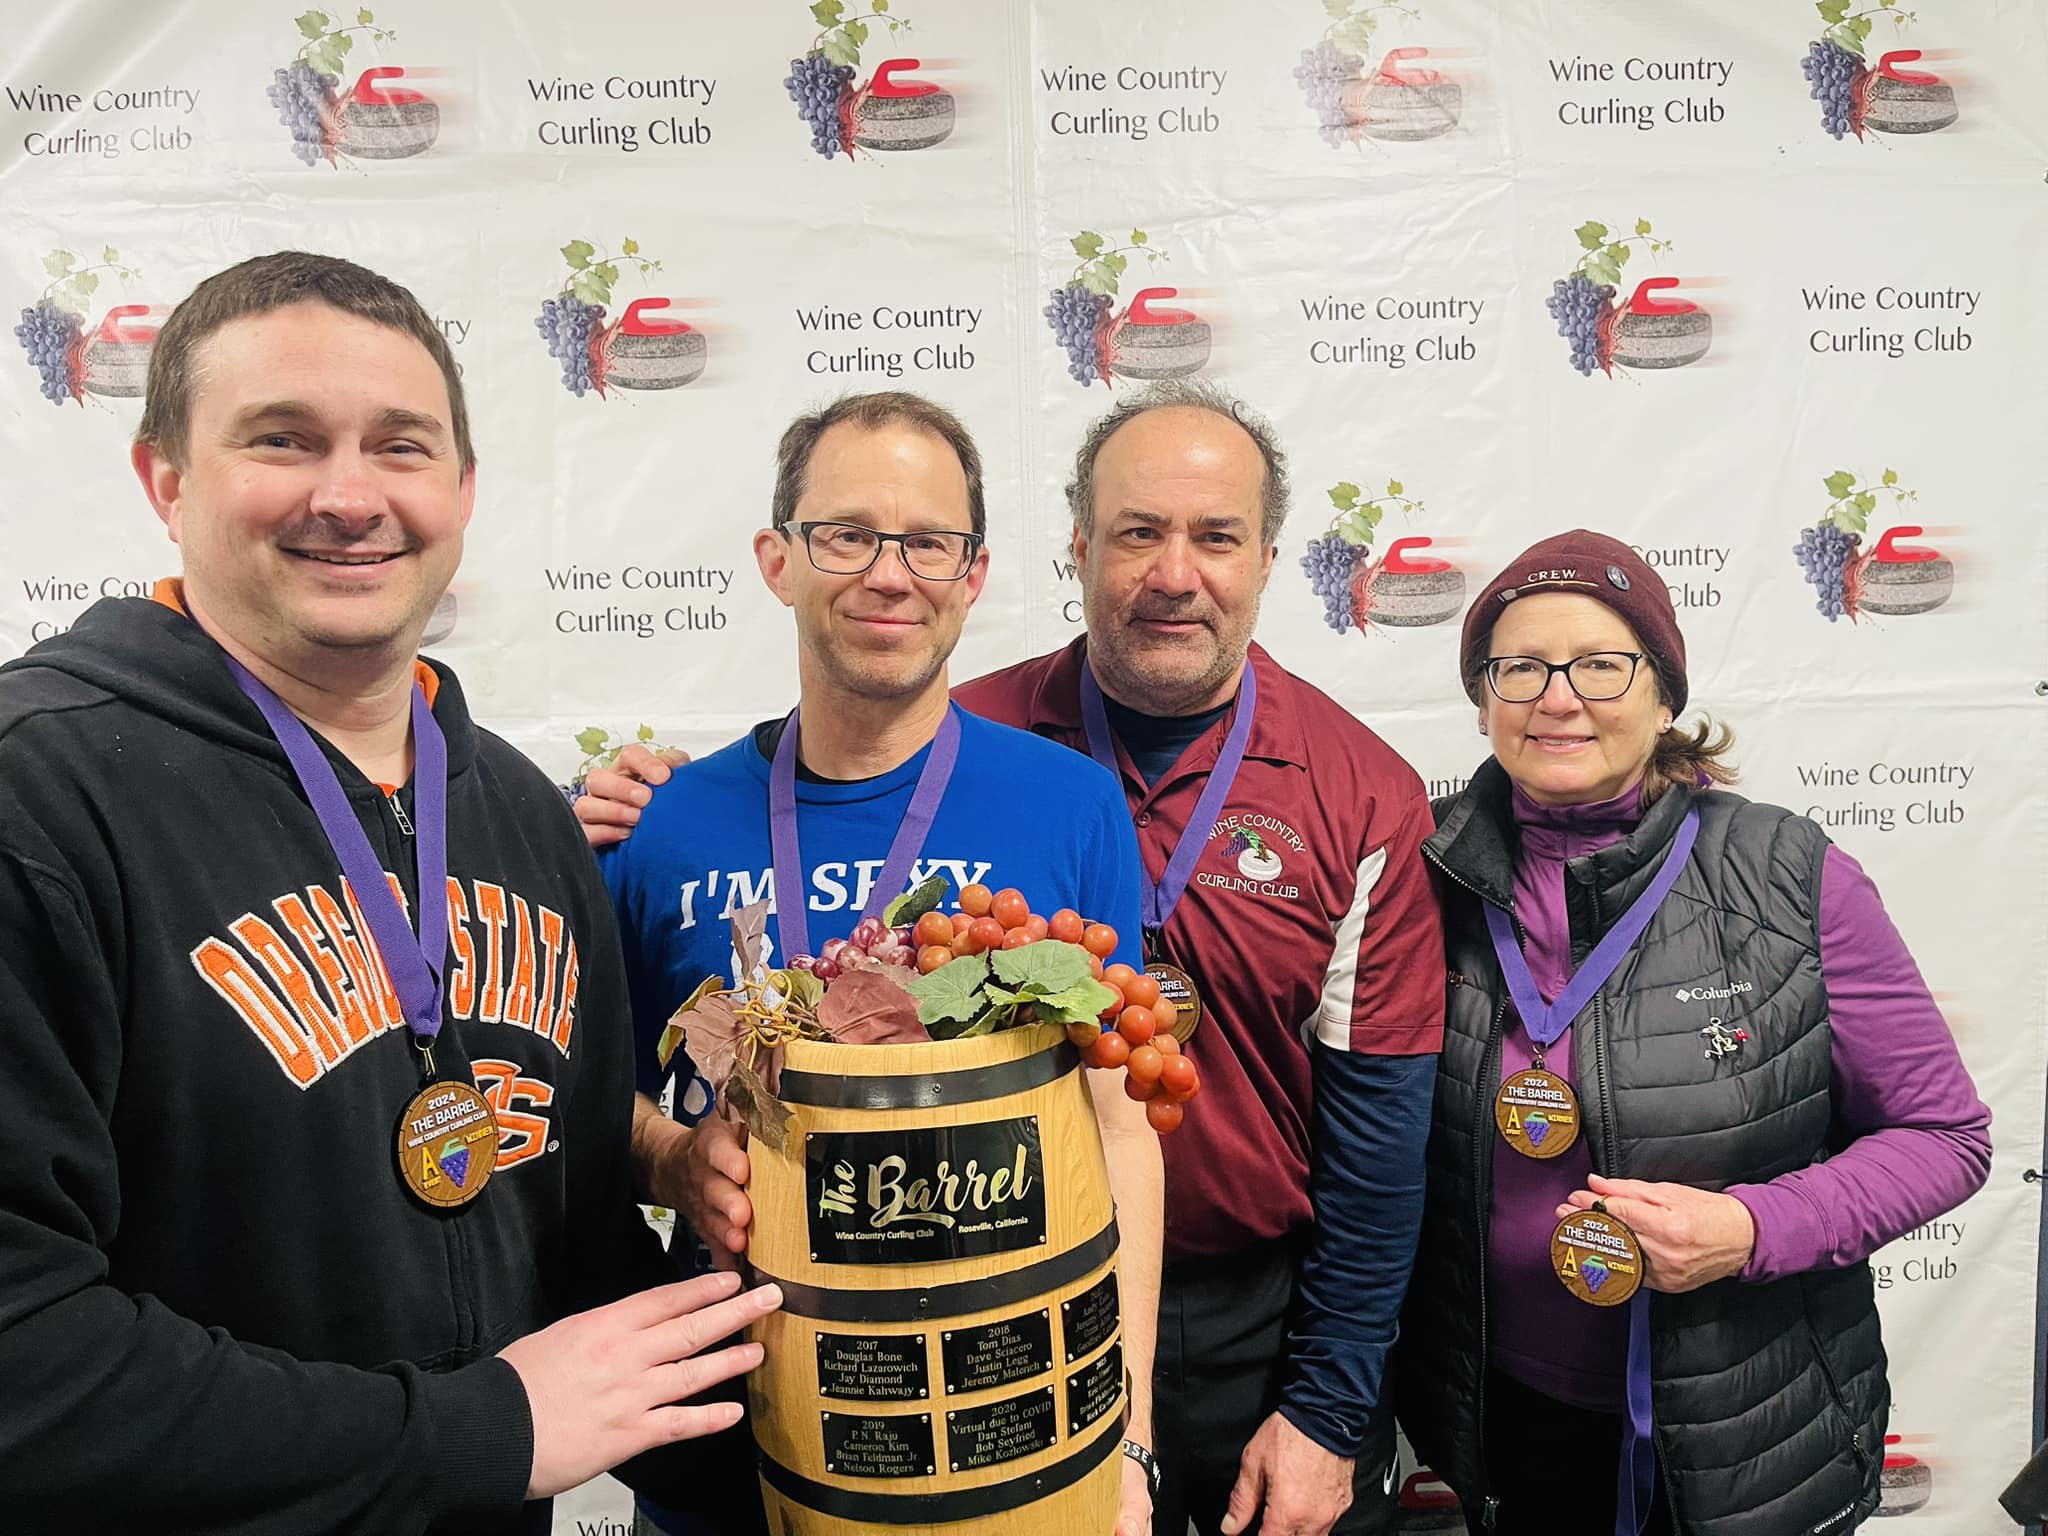 2024 Barrel Winners: Team Hit and row, row, row your boat: Camren Spangler, Steve Sampson, Bob Seyfried, Mary Roberts, Nancy Cochrane (not pictured)